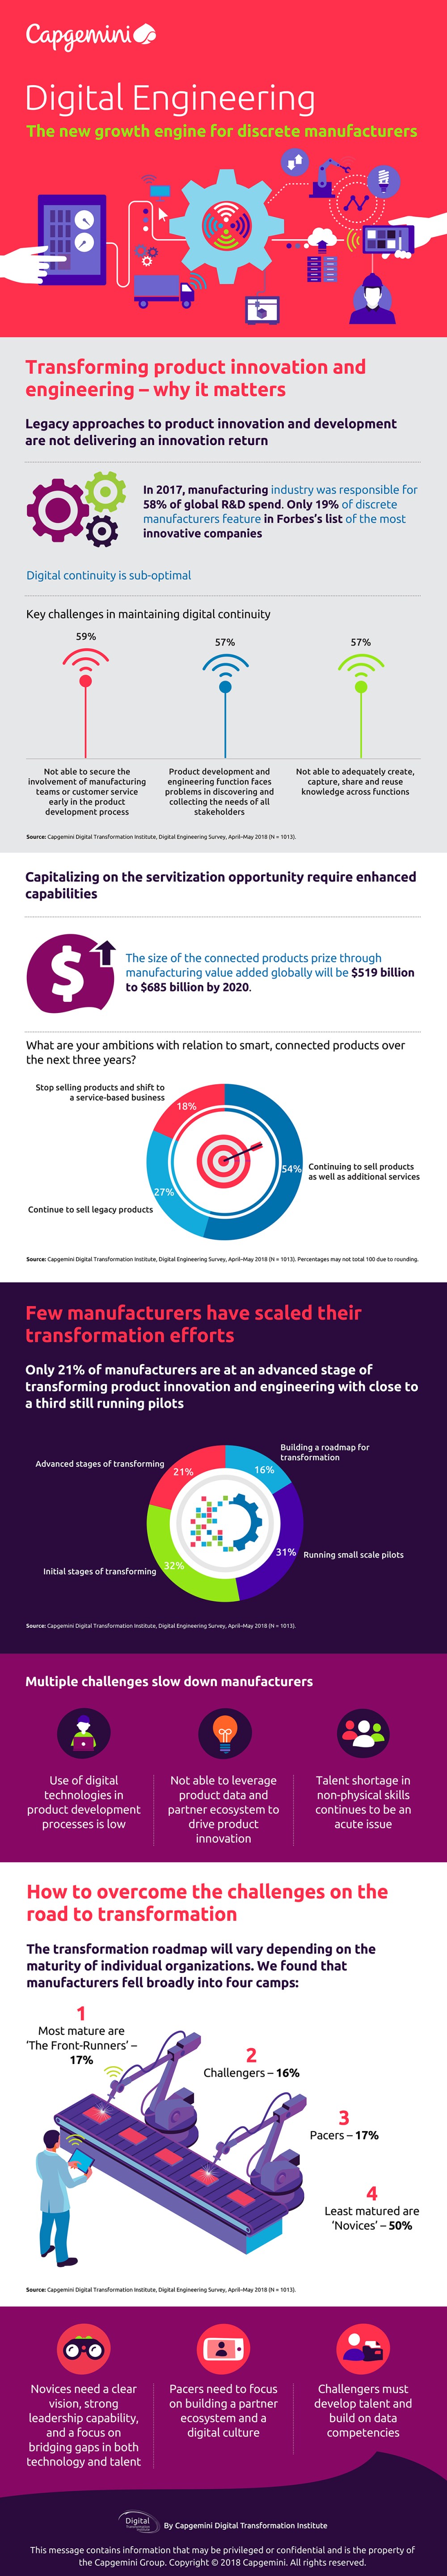 A new report by Capgemini’s Digital Transformation Institute reveals that the global manufacturing industry could expect to see between $519-$685 billion in value-added revenue by 2020 through the development and sale of smart, connected devices. The report also highlights that while the potential returns are significant, manufacturers need to invest in digital continuity and digital capabilities to benefit. 